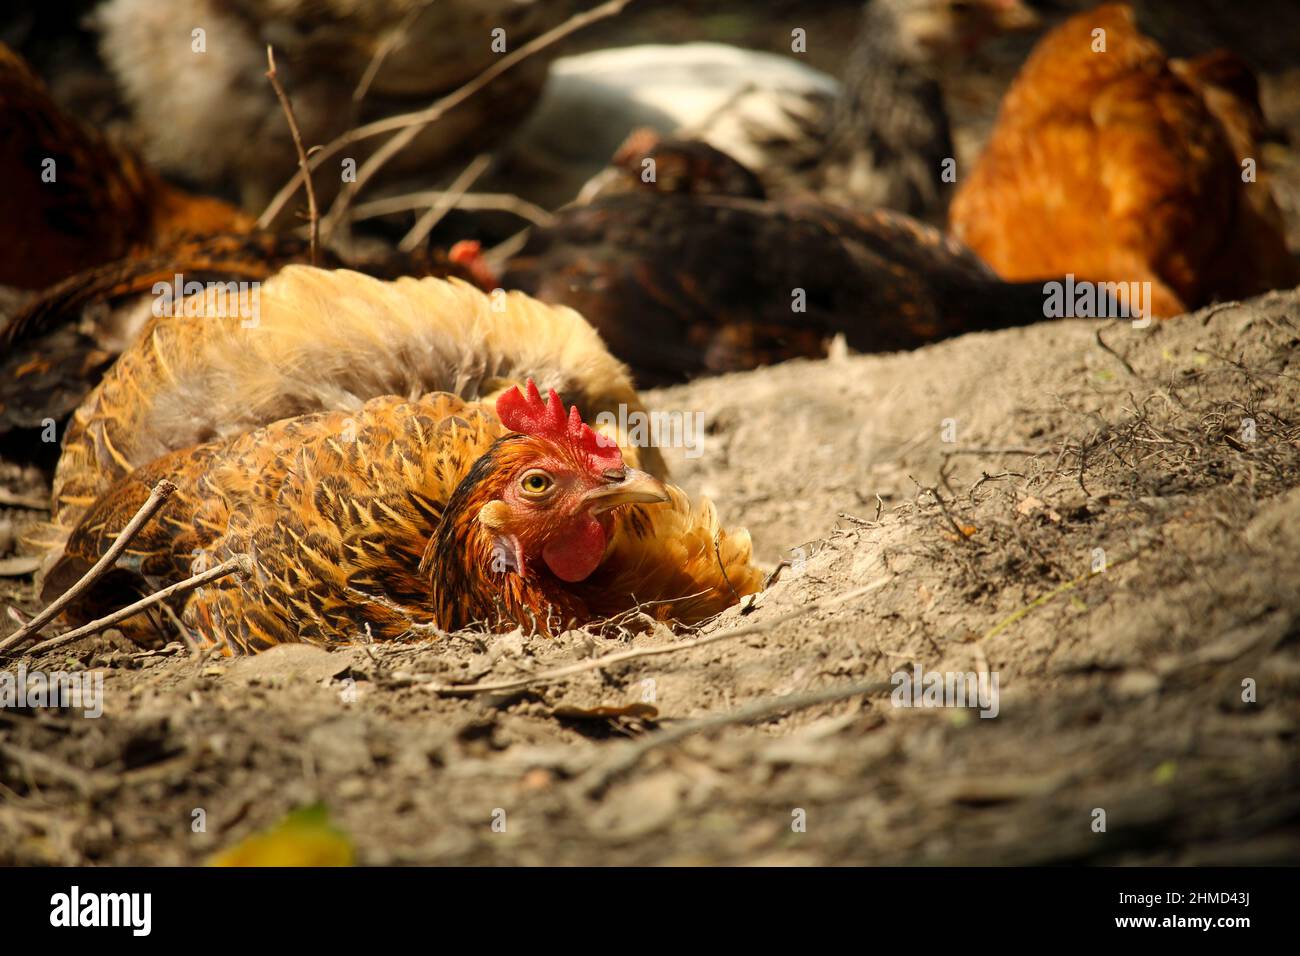 The brown chicken is rolling on the ground Stock Photo